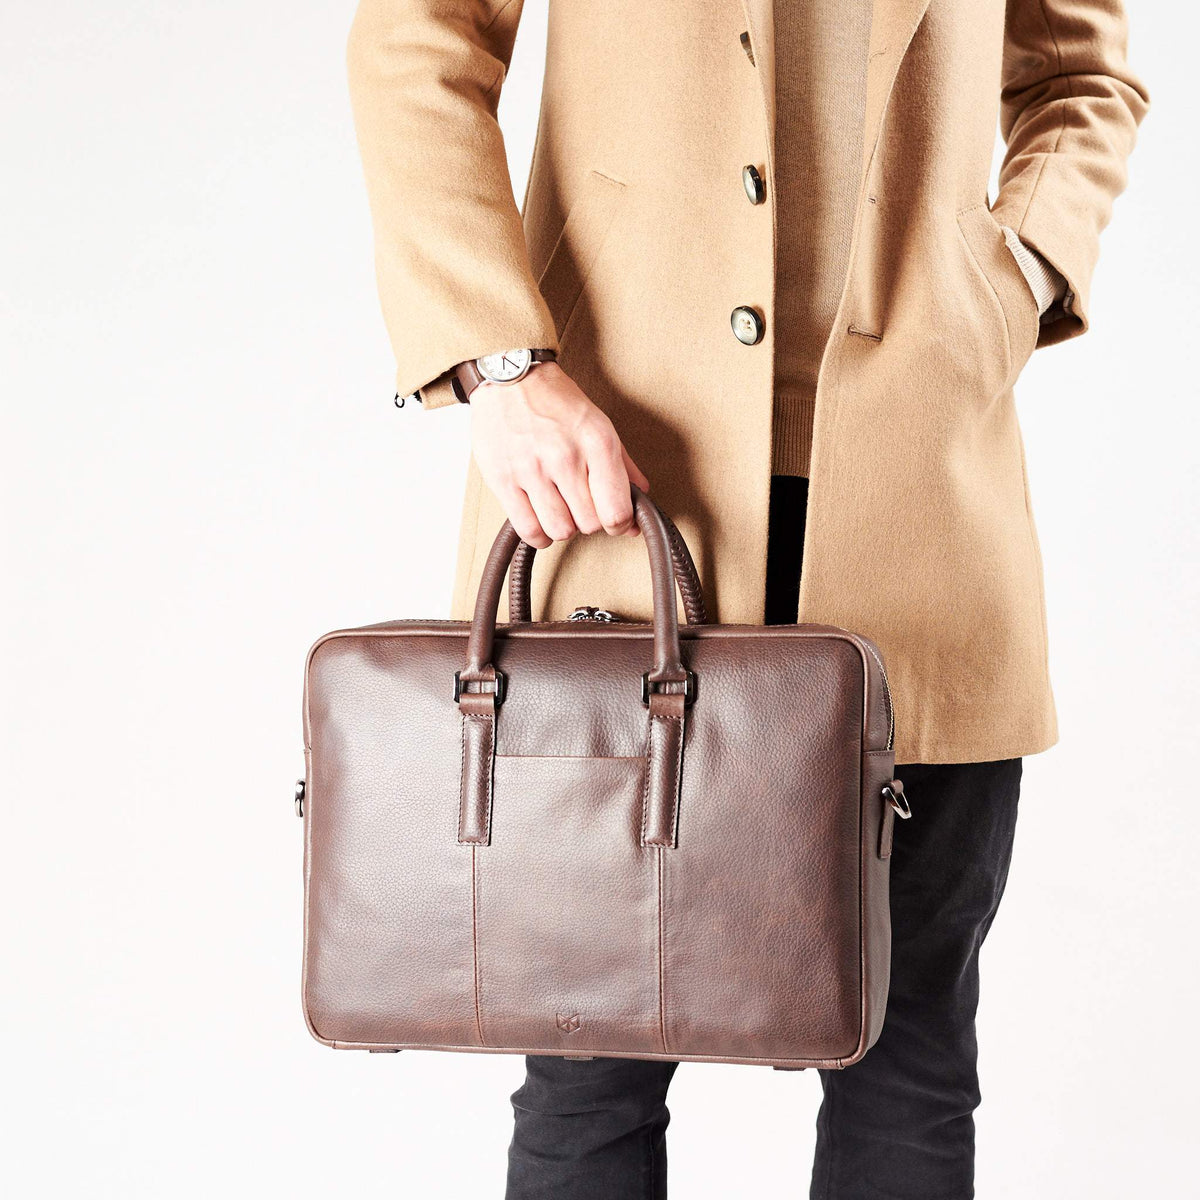 Style view, model holding bussiness document portfolio bag .Dark Brown leather briefcase laptop bag for men. Gazeli laptop briefcase by Capra Leather.